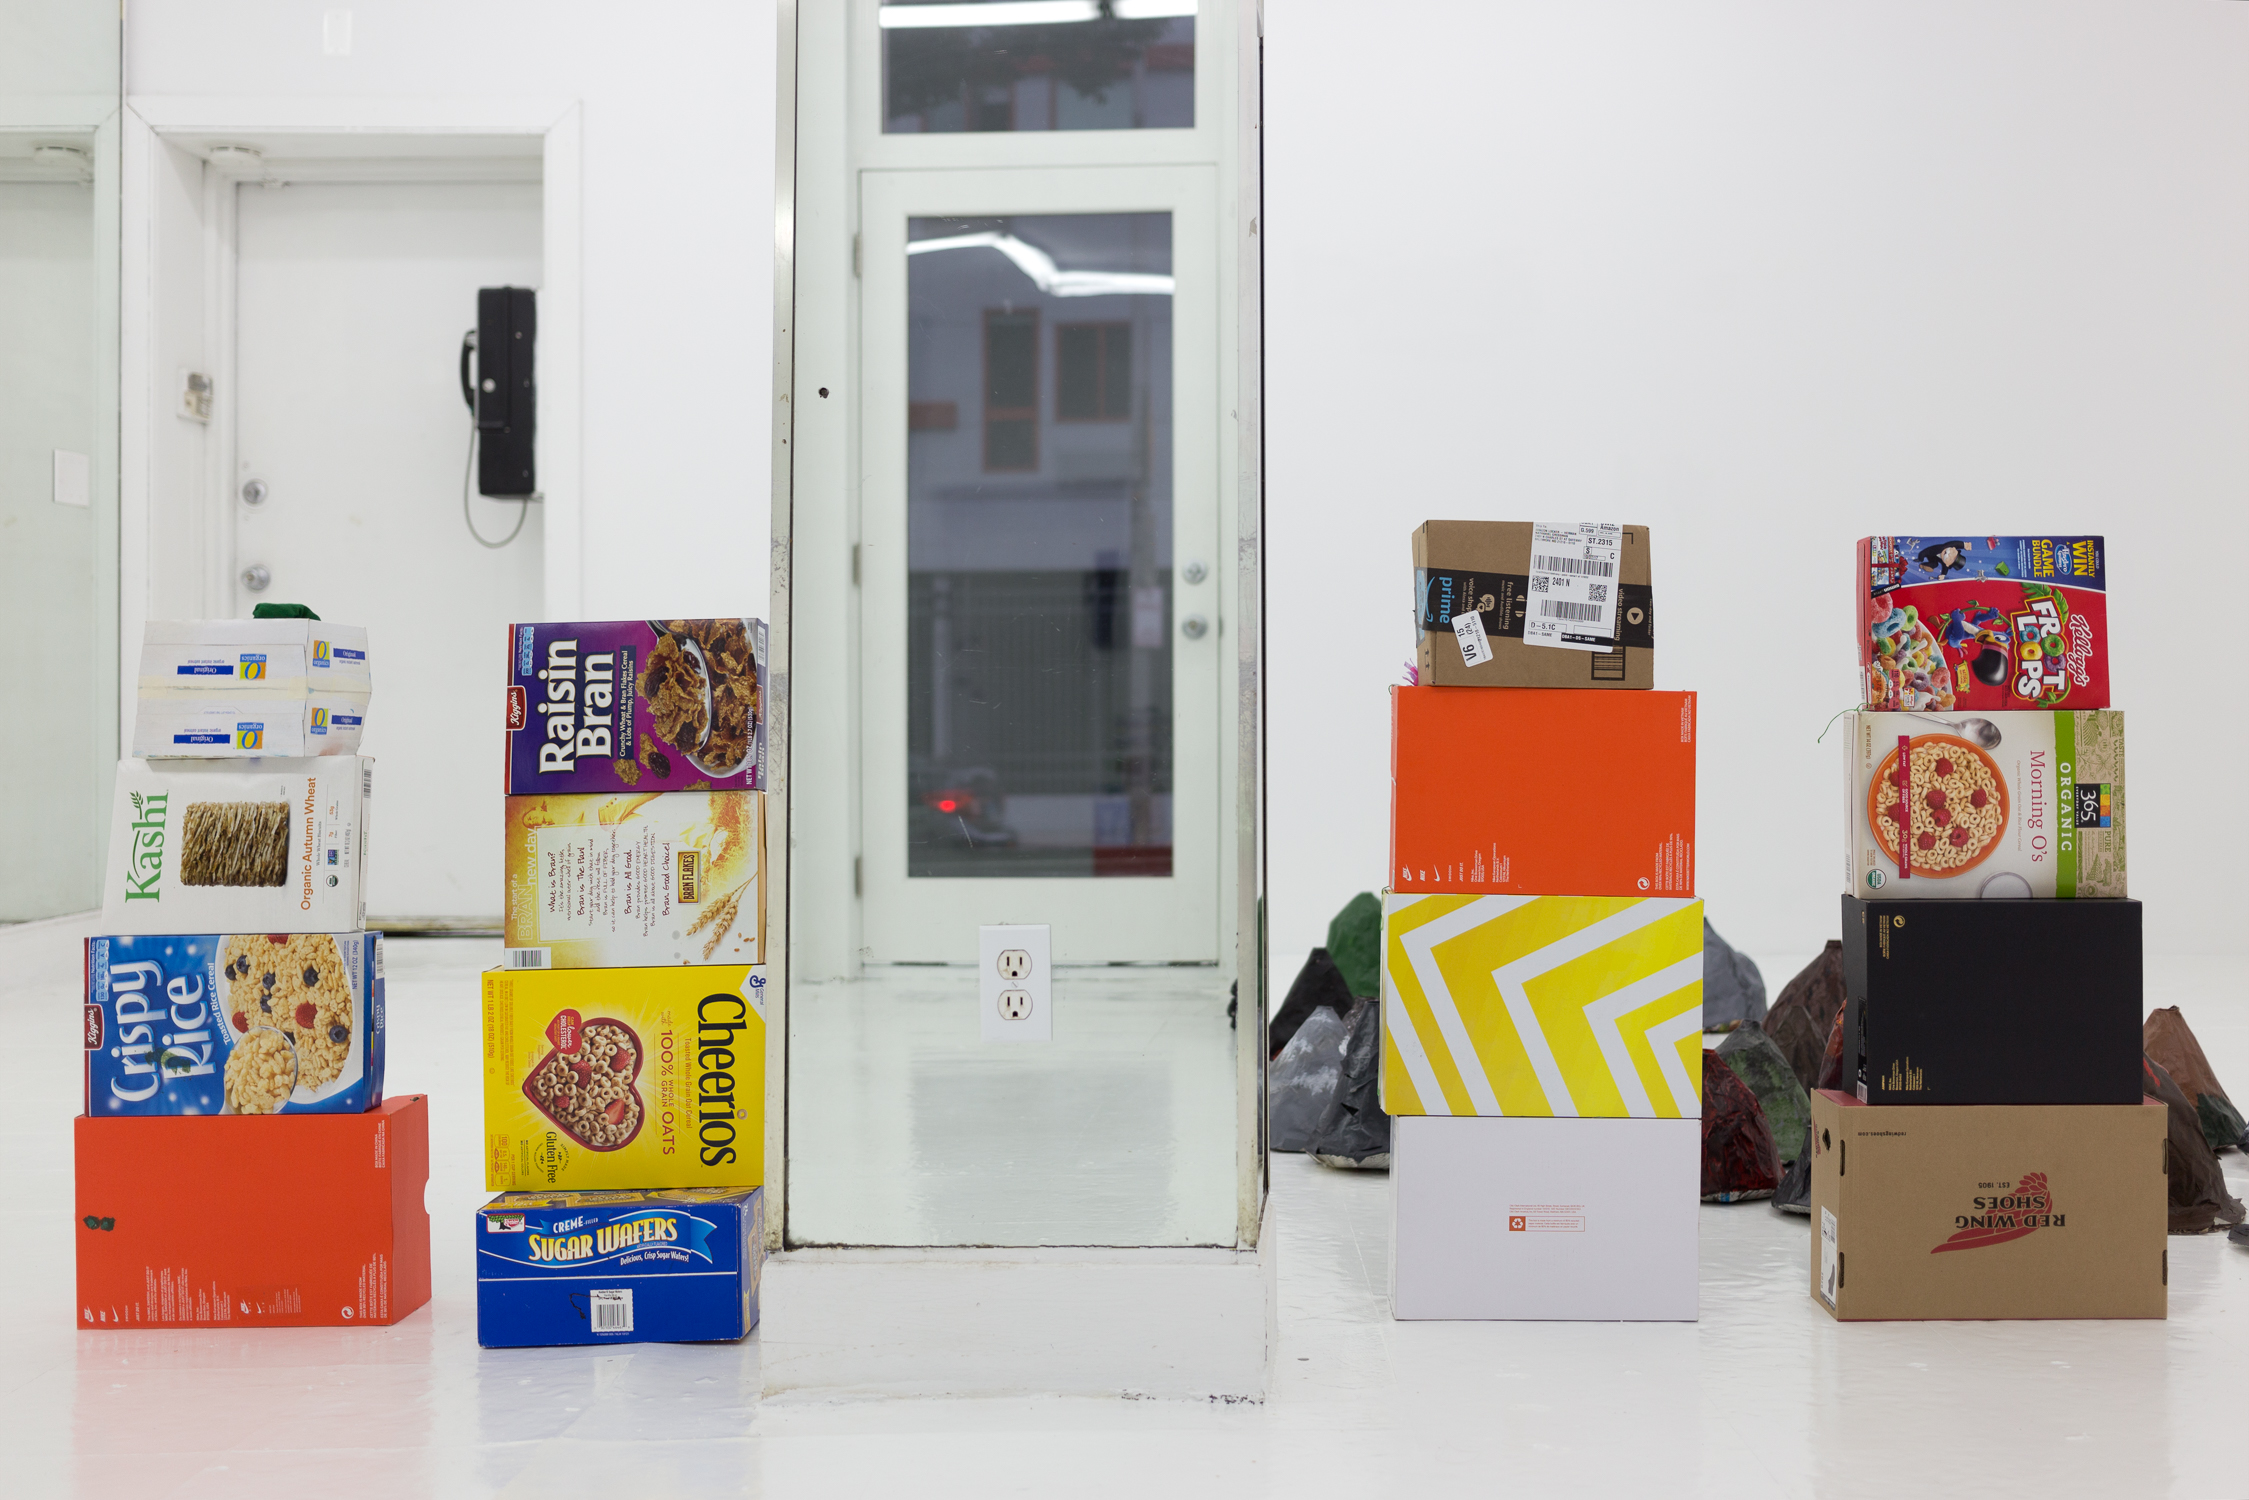 Stacks of cardboard cereal and show boxes, next to a mirrored column